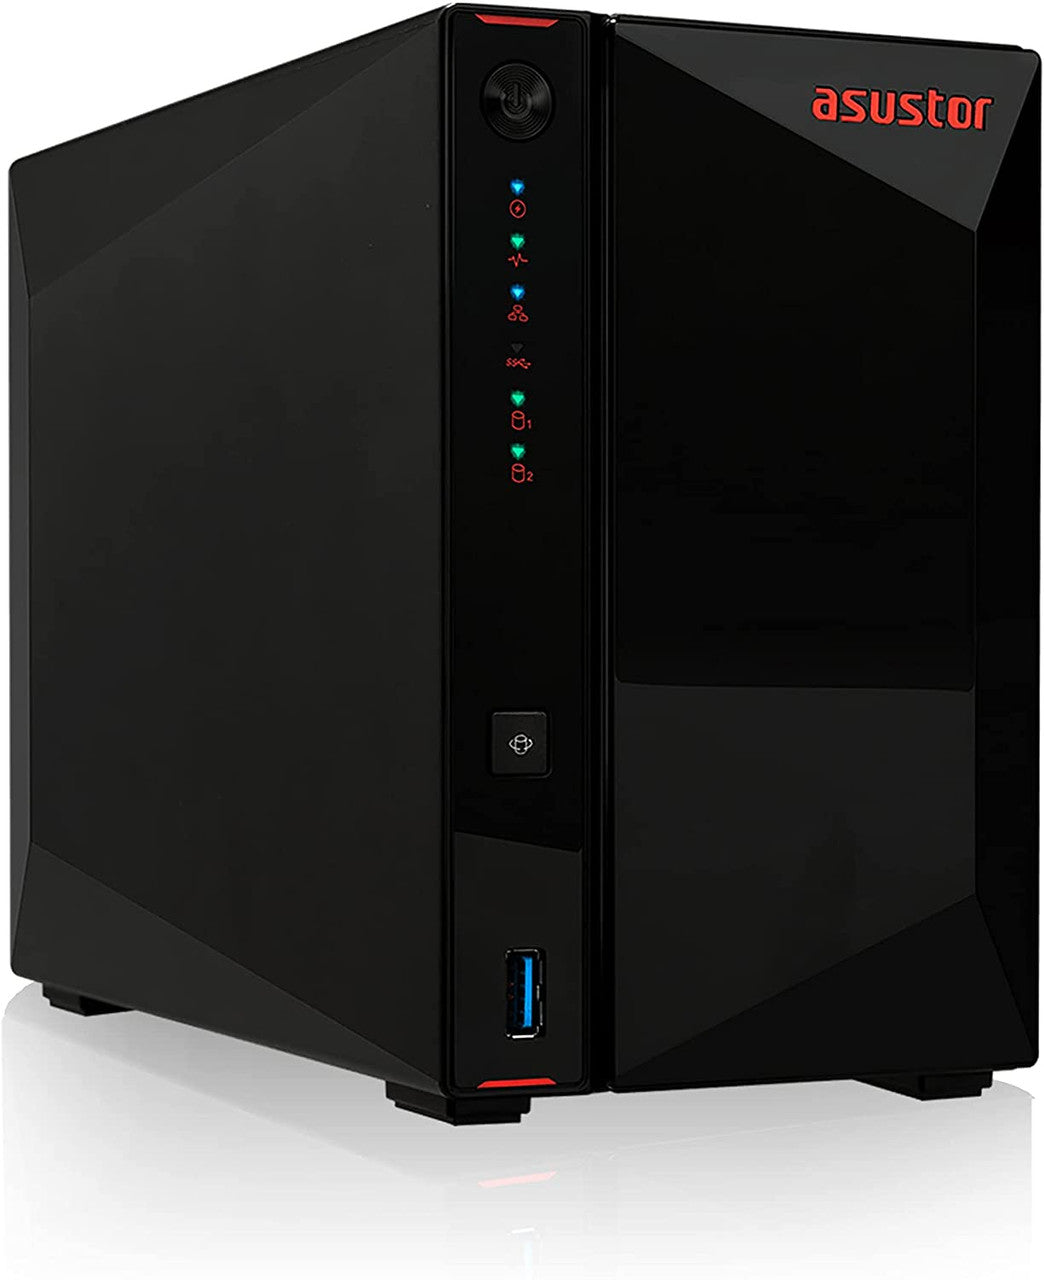 Asustor AS5202T 2-Bay Nimbustor 2 NAS with 2GB RAM and 16TB (2 x 8TB) Seagate Ironwolf PRO Drives Fully Assembled and Tested